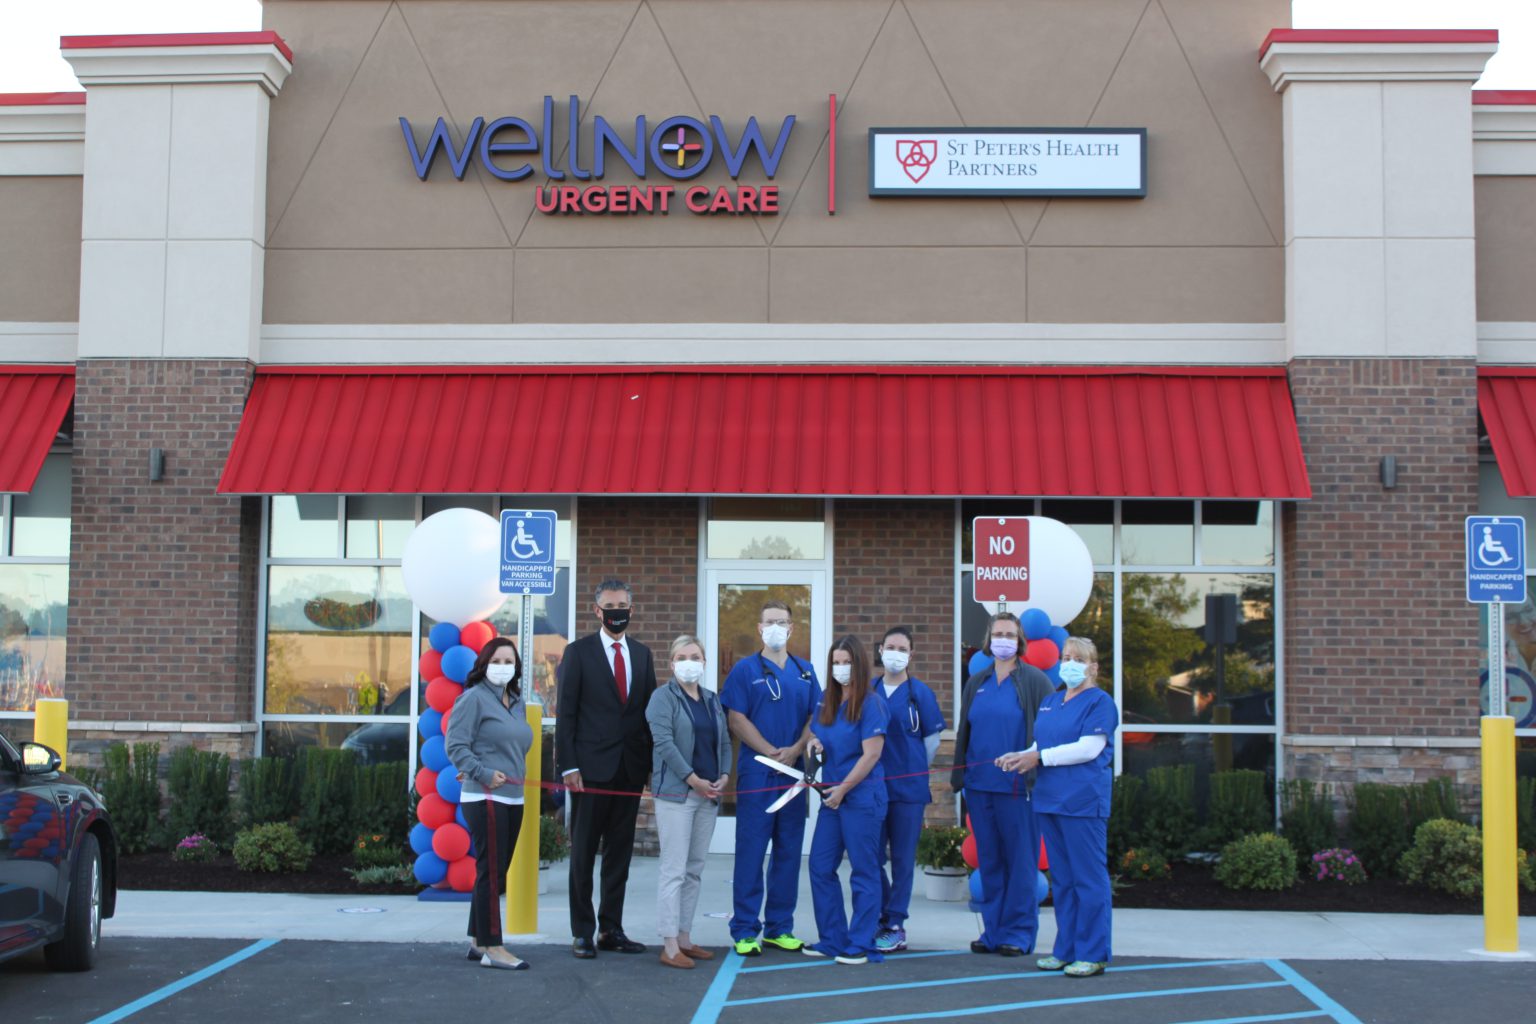 St. Peter's Health Partners and WellNow Urgent Care Open New Center in